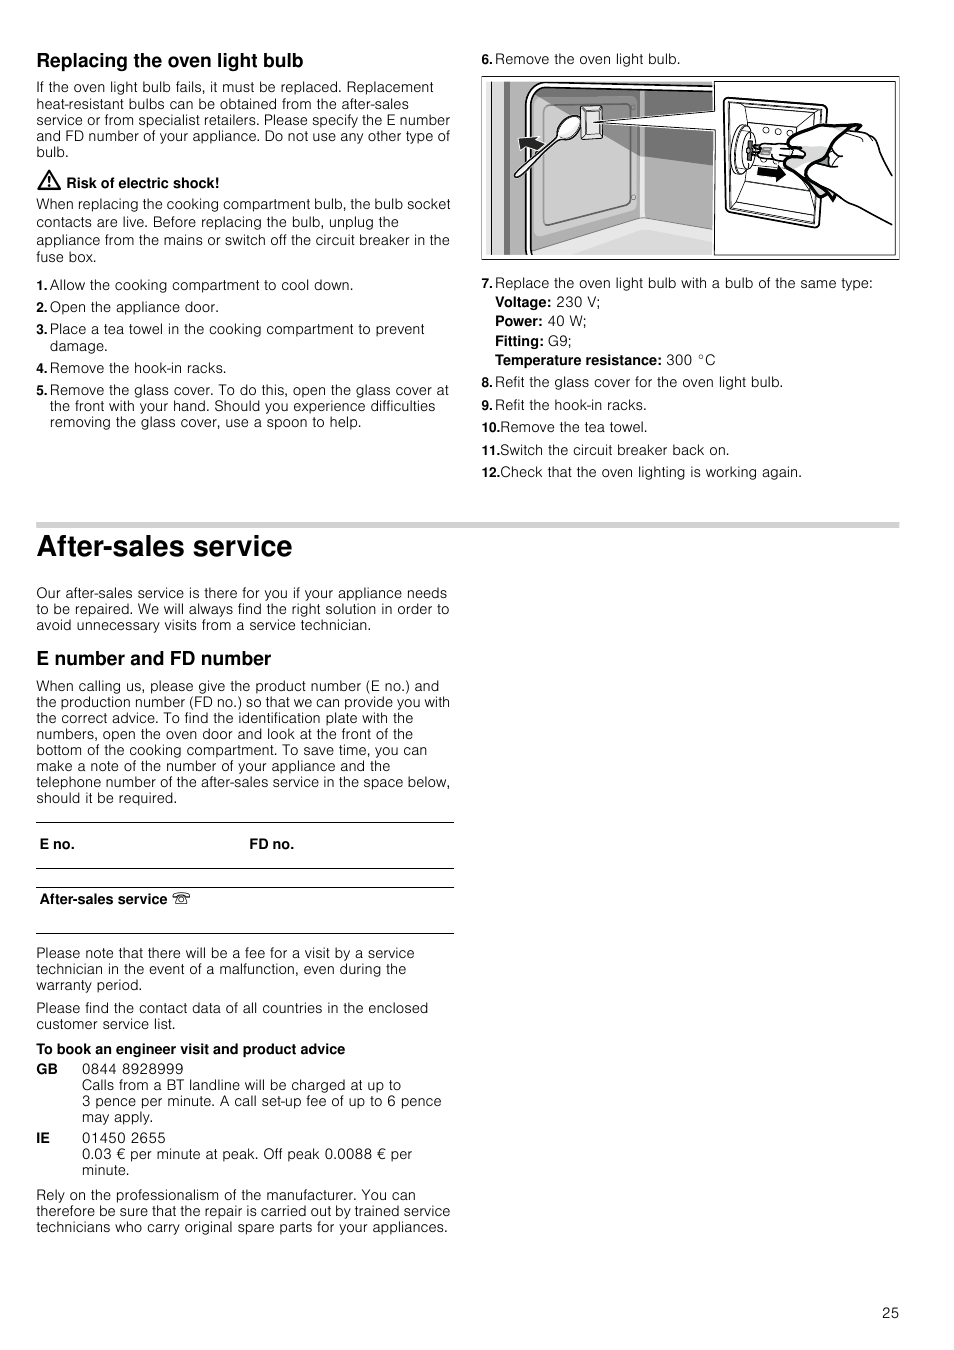 Replacing the oven light bulb, Risk of electric shock, Allow the cooking compartment cool down | Siemens HV541ANS0 User Manual | 25 / 72 | Original mode